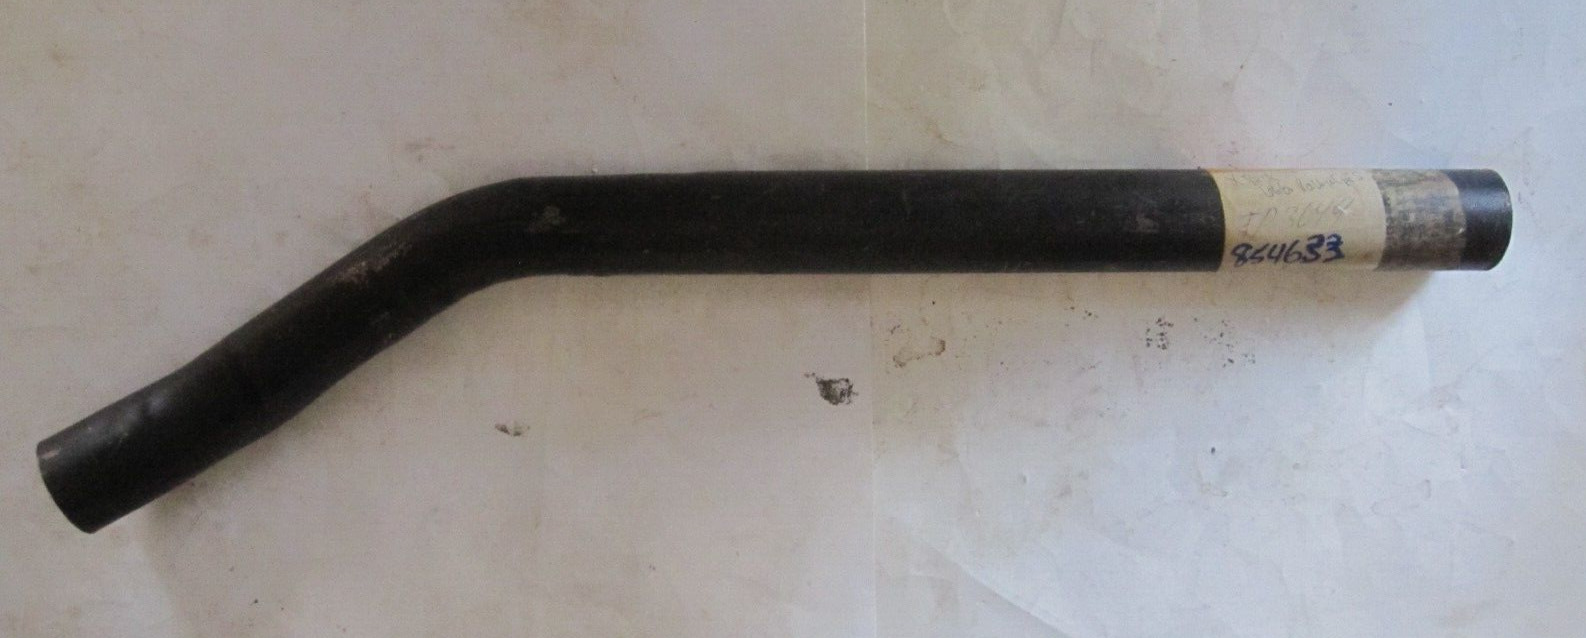 OPEL KADETT MODEL 32 COUPE 1966-67 1.1 LITER NEW OLD STOCK  EXHAUST TAIL PIPE